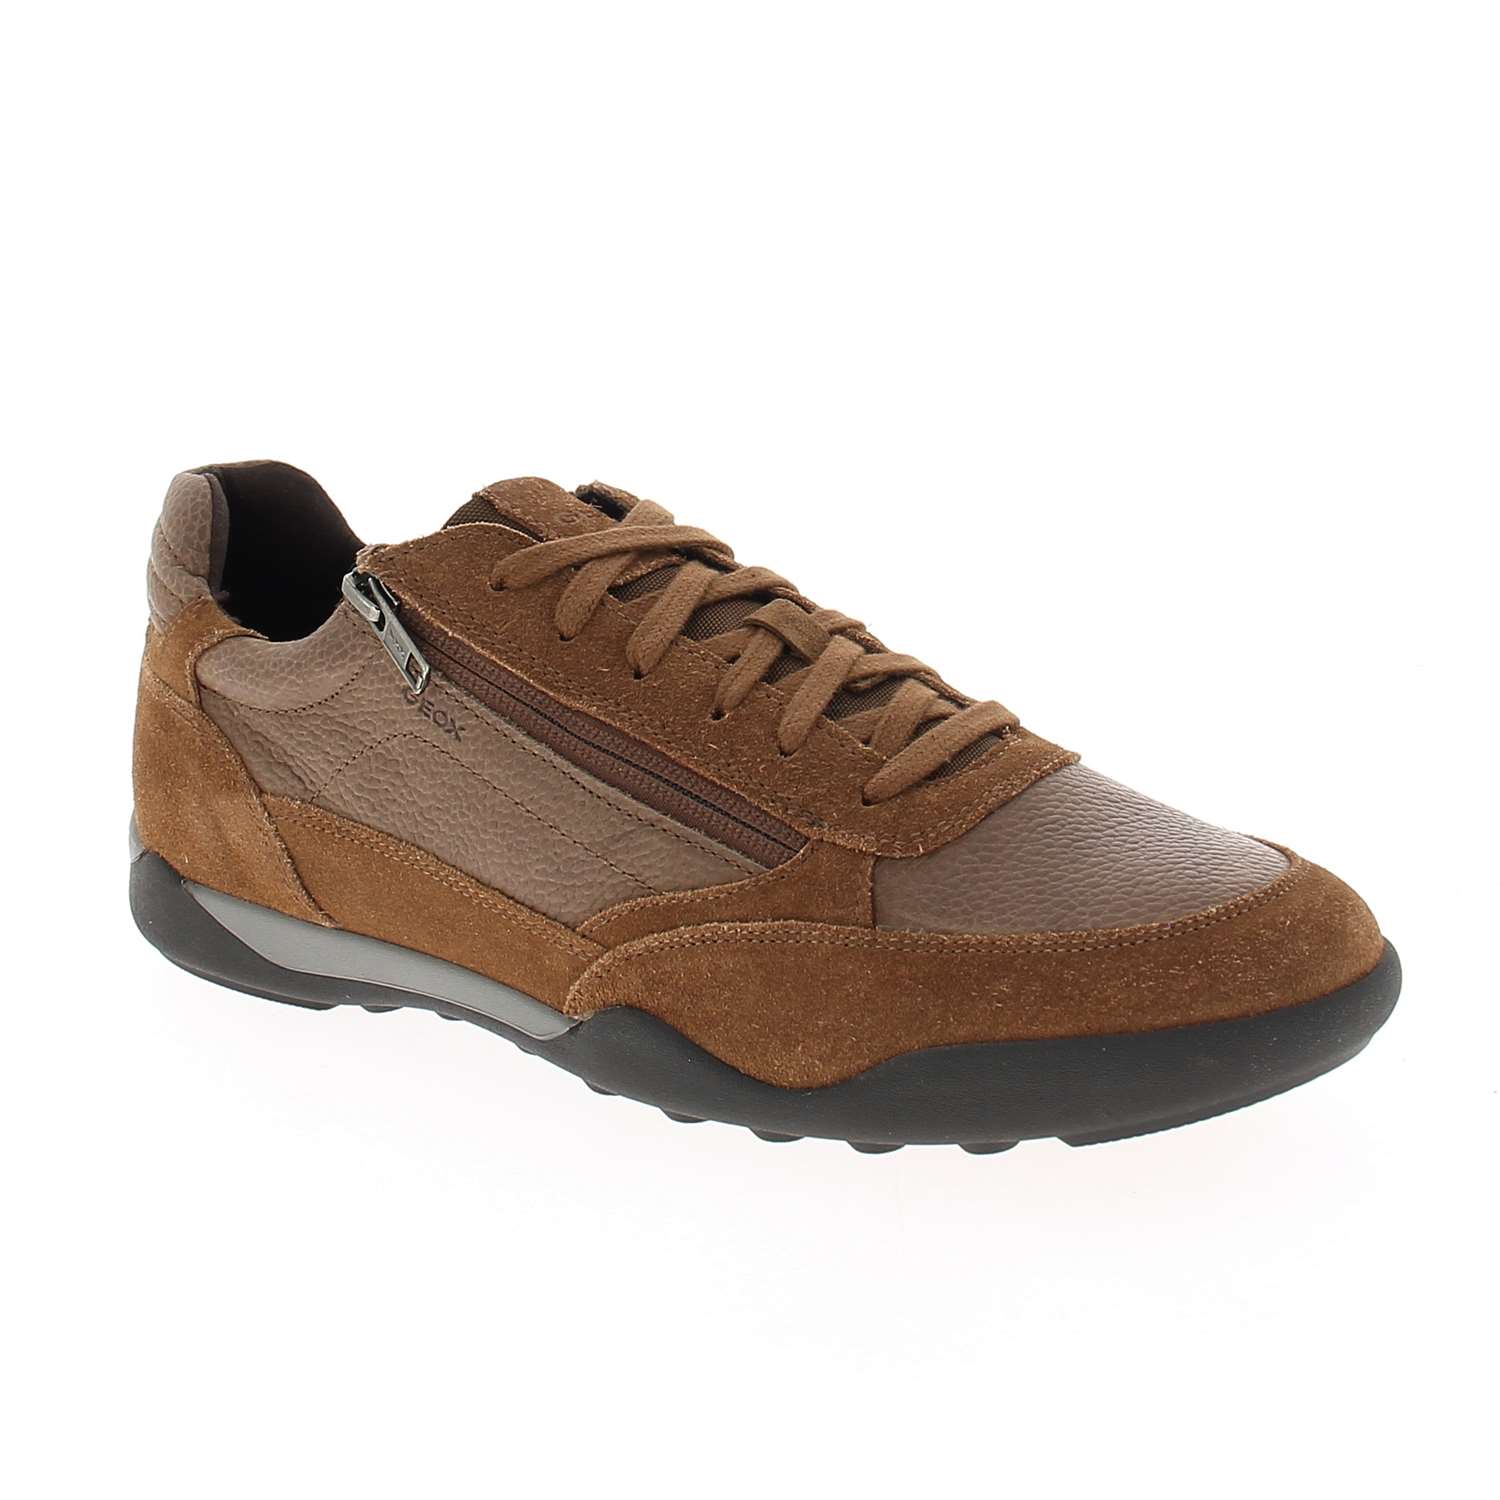 01 - METHODO - GEOX - Chaussures à lacets - Cuir